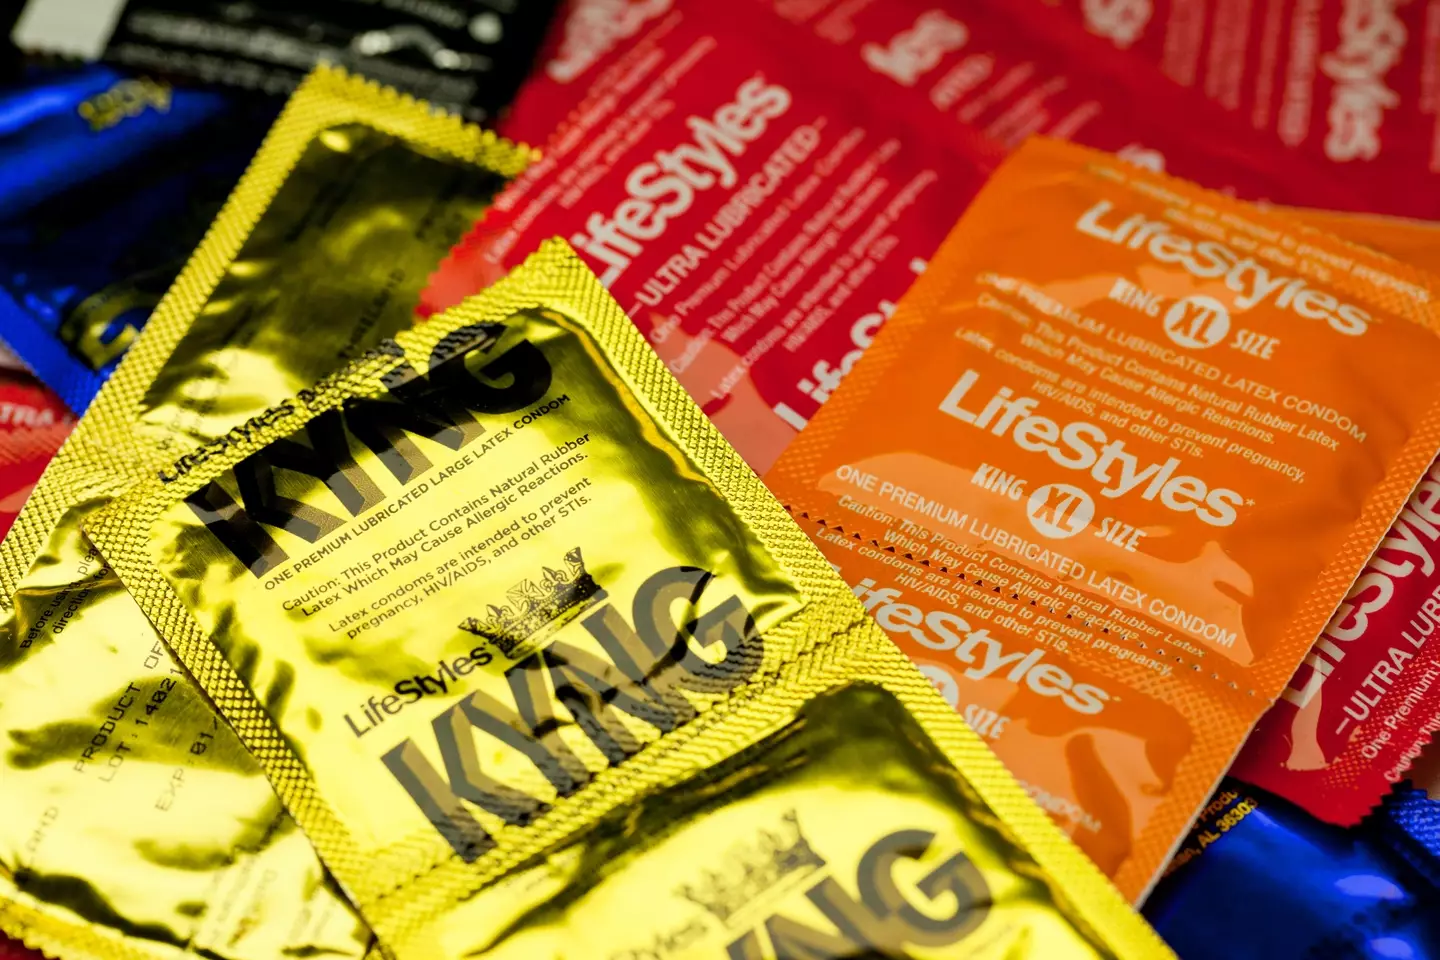 Condoms or vasectomy are the only options for male contraception at the moment.